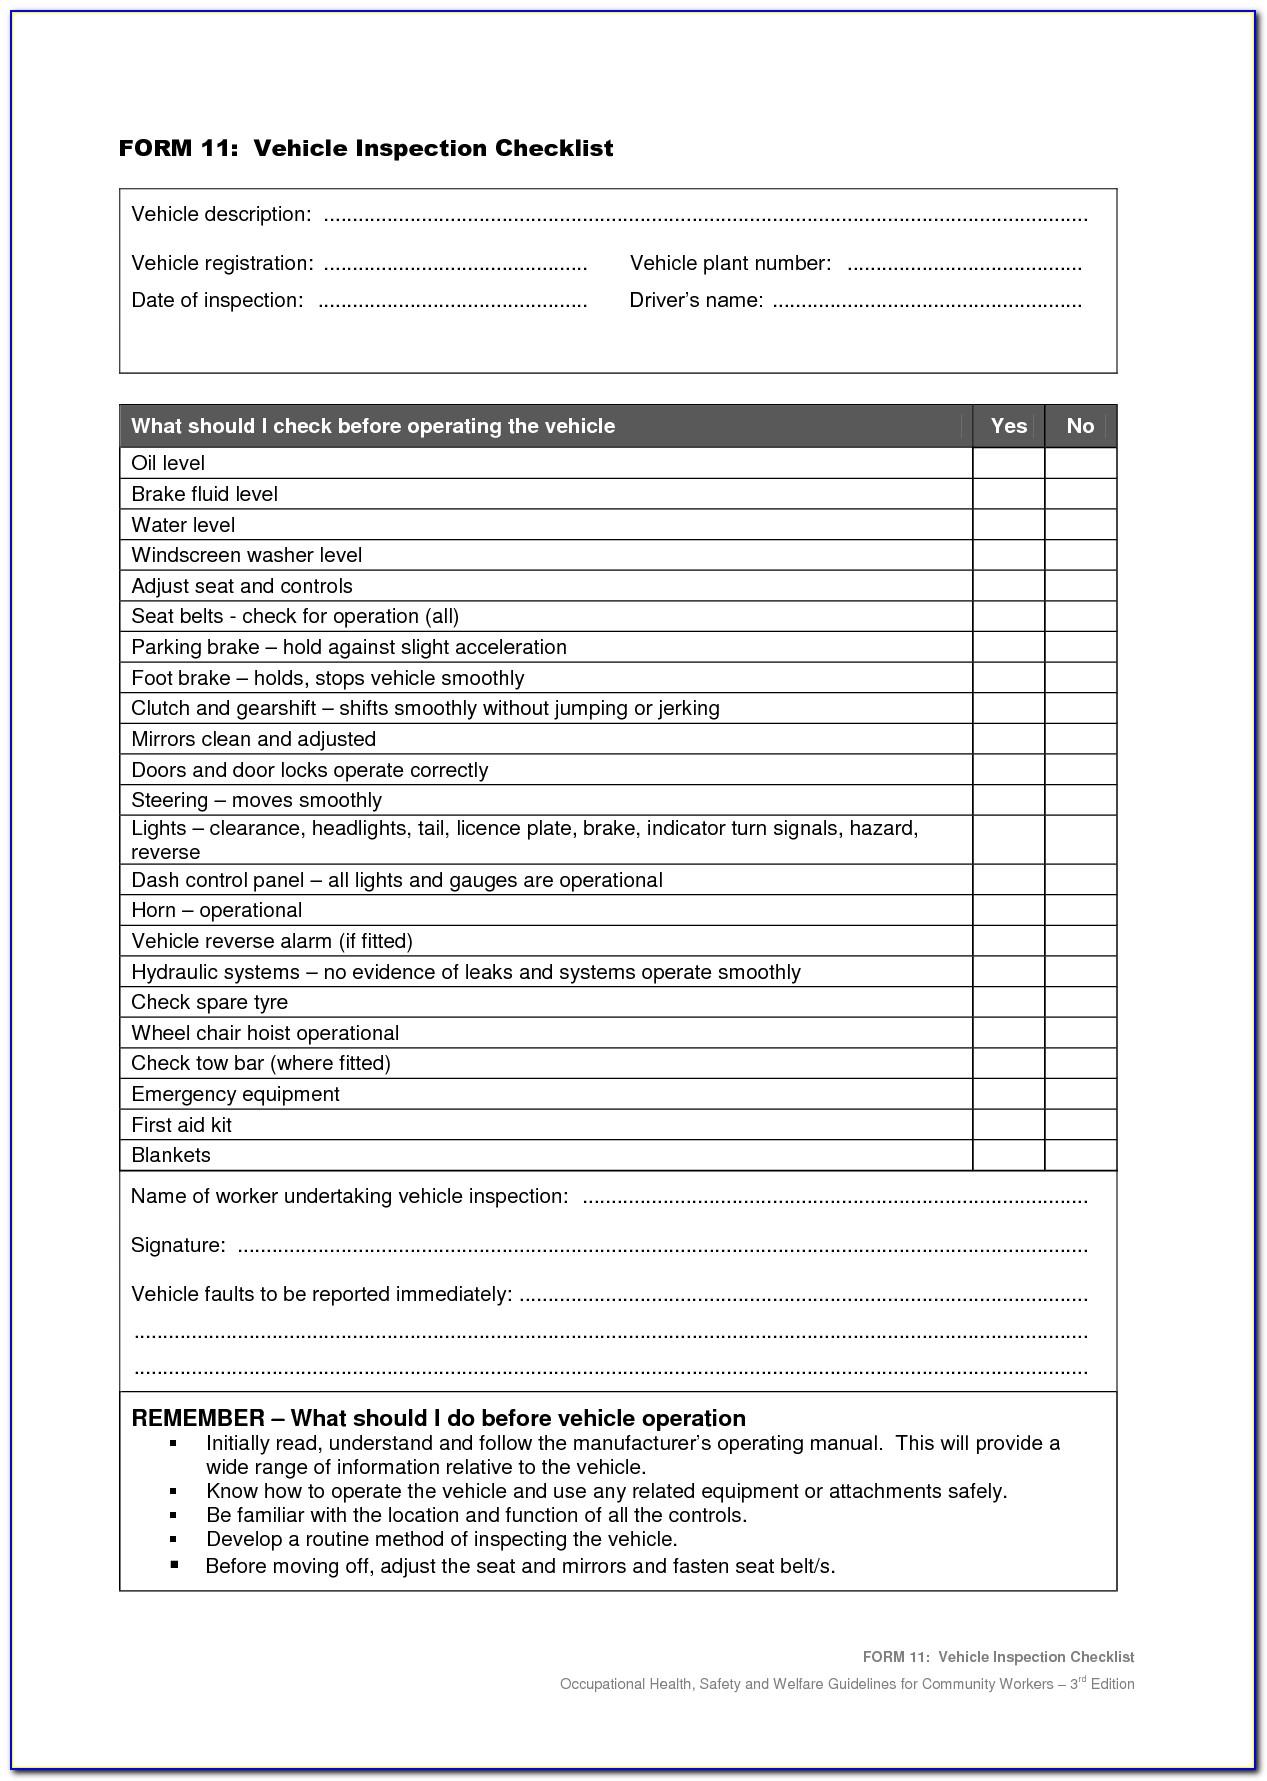 Vehicle Contract Hire Agreement Template